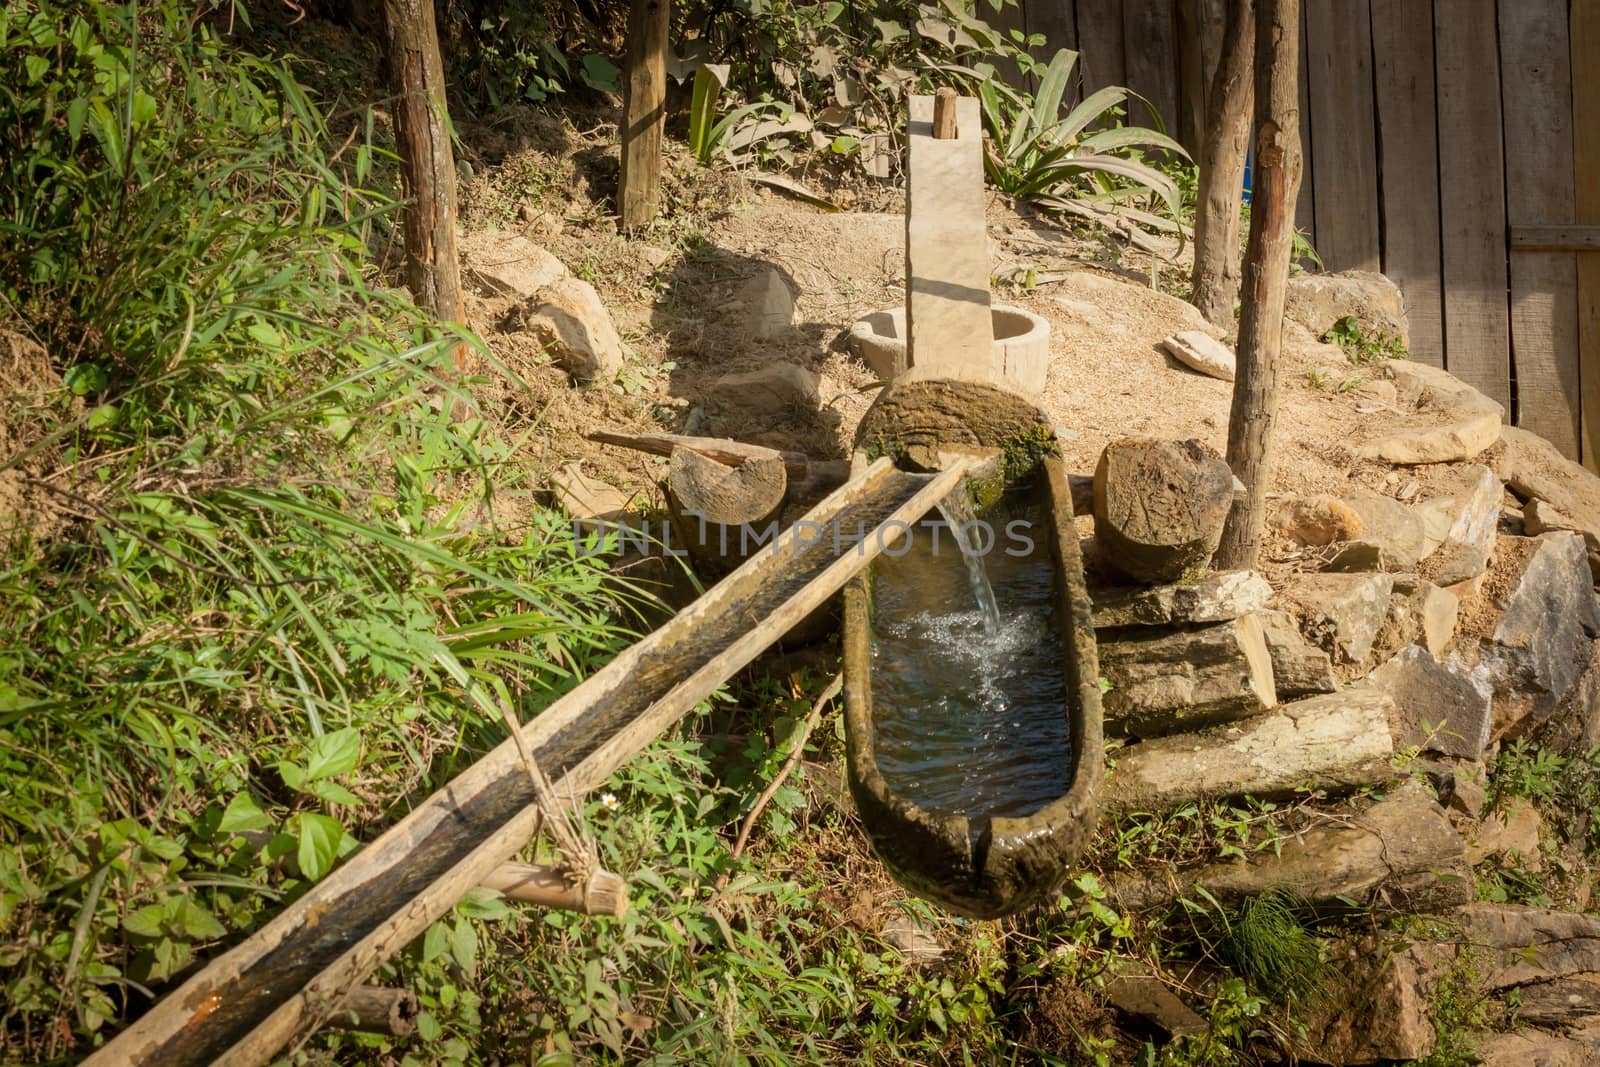 Large mallet and mortar for pounding paddy to separate the grains from the chaff, action for water power in Sapa, Vietnam. 